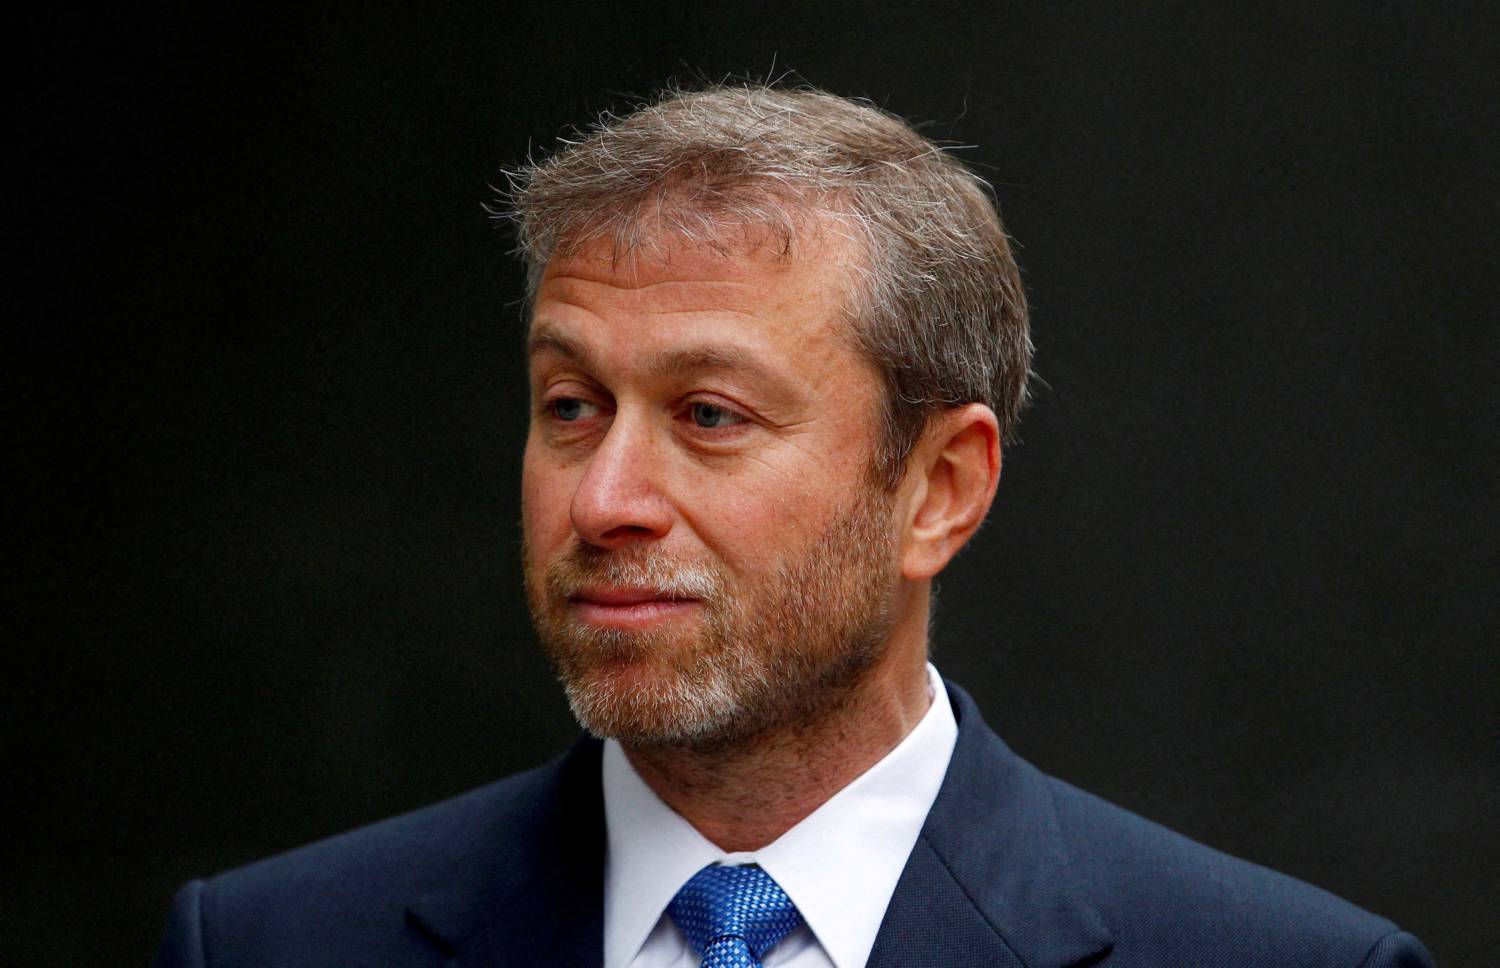 File Photo: File Photo: Russian Billionaire And Owner Of Chelsea Football Club Roman Abramovich Arrives At A Division Of The High Court In Central London